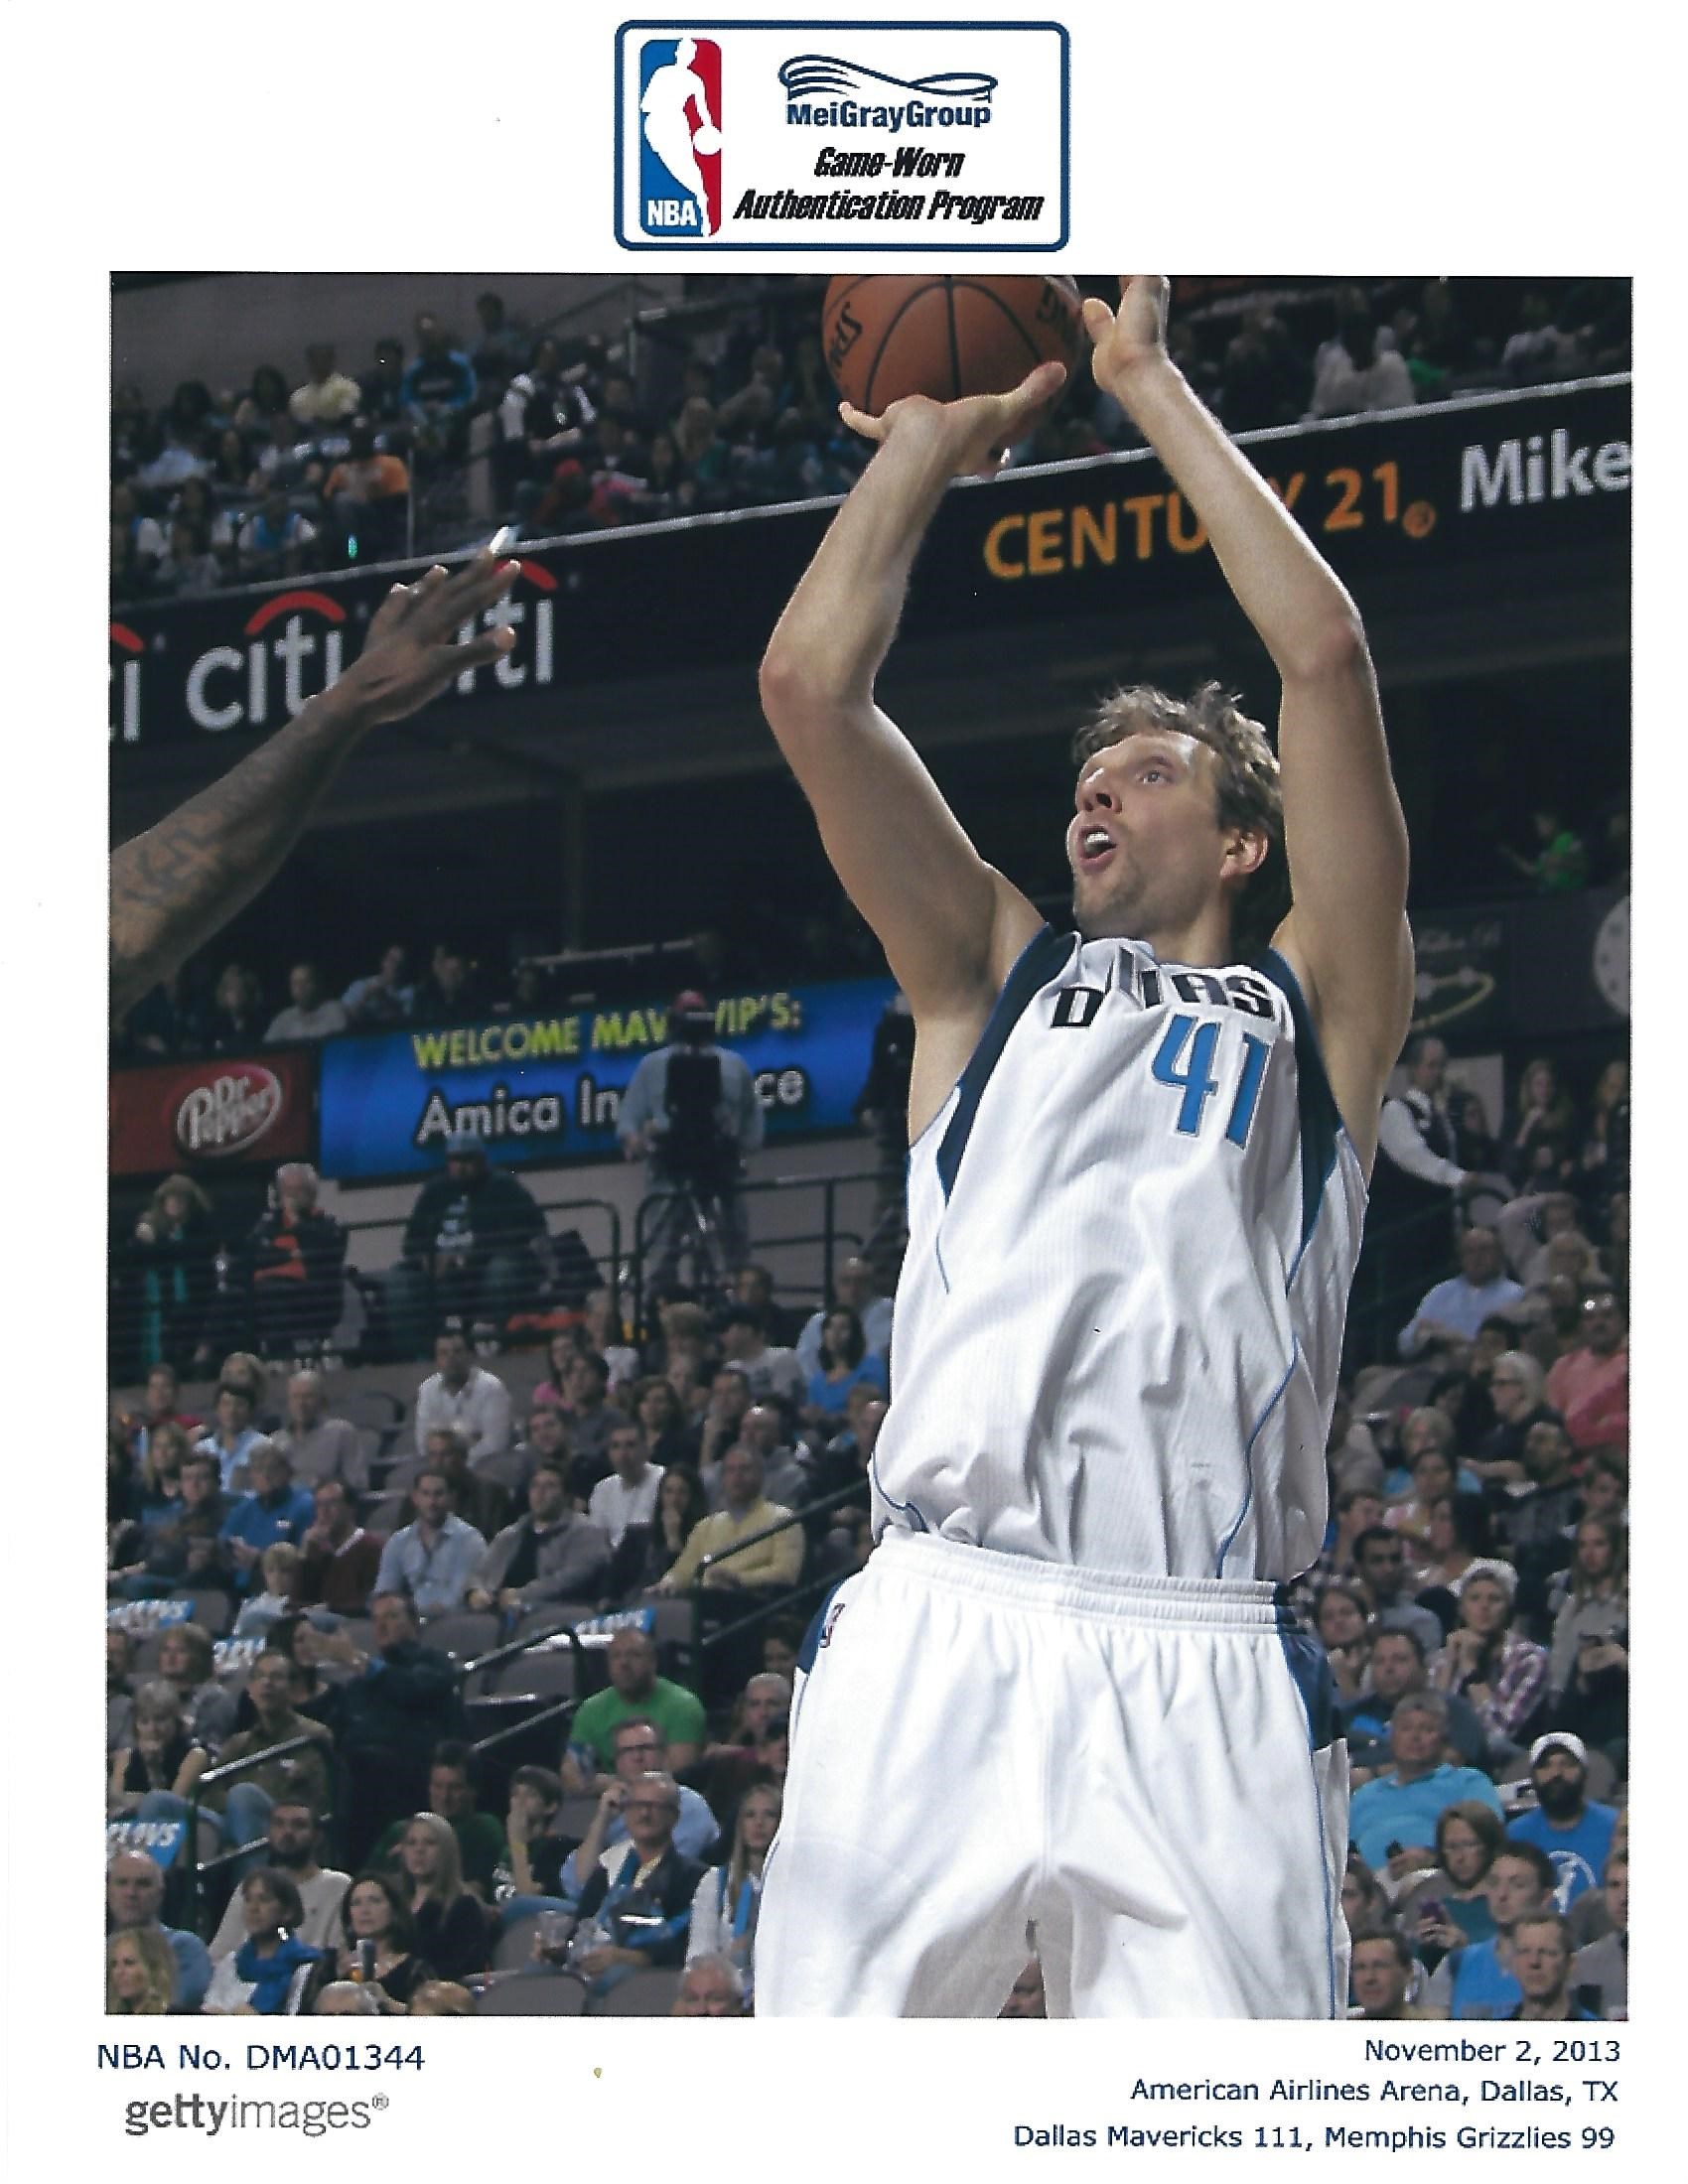 2013-14 Dirk Nowitzki Game-Used, Photo-Matched, Signed Road Jersey